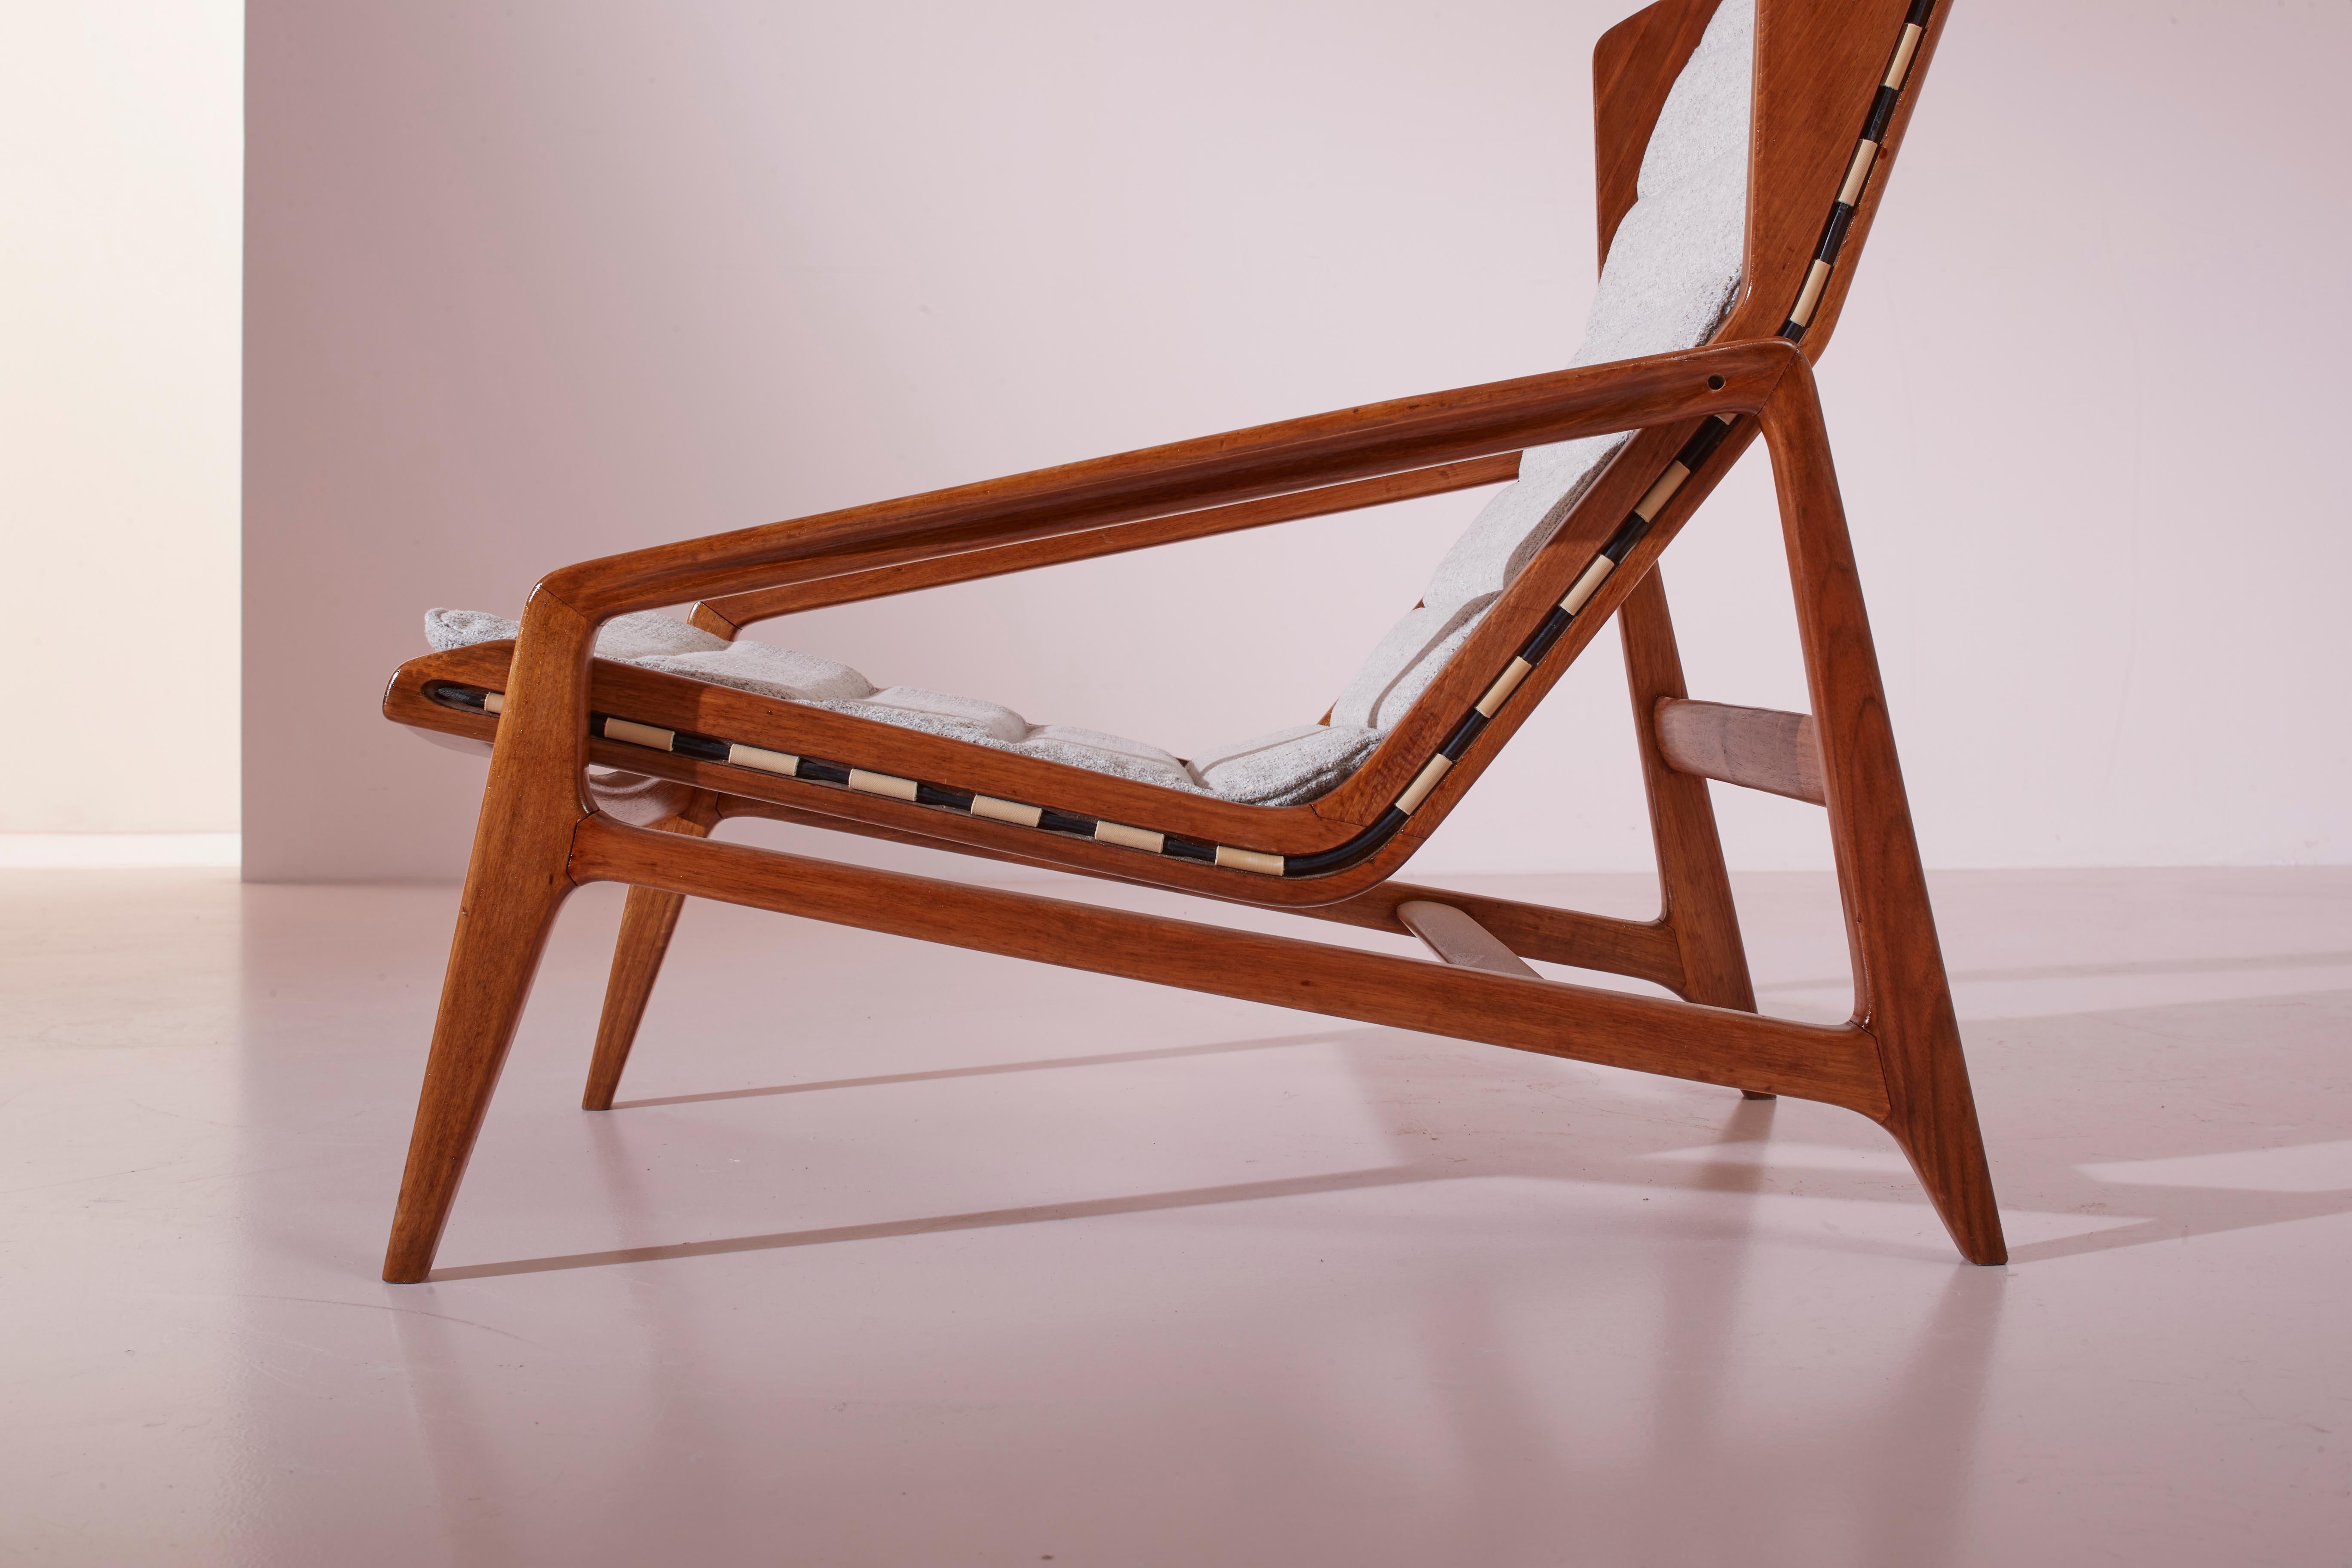 Gio Ponti Model 811 armchair made of walnut and rubber, Cassina, Italy, 1957 For Sale 7